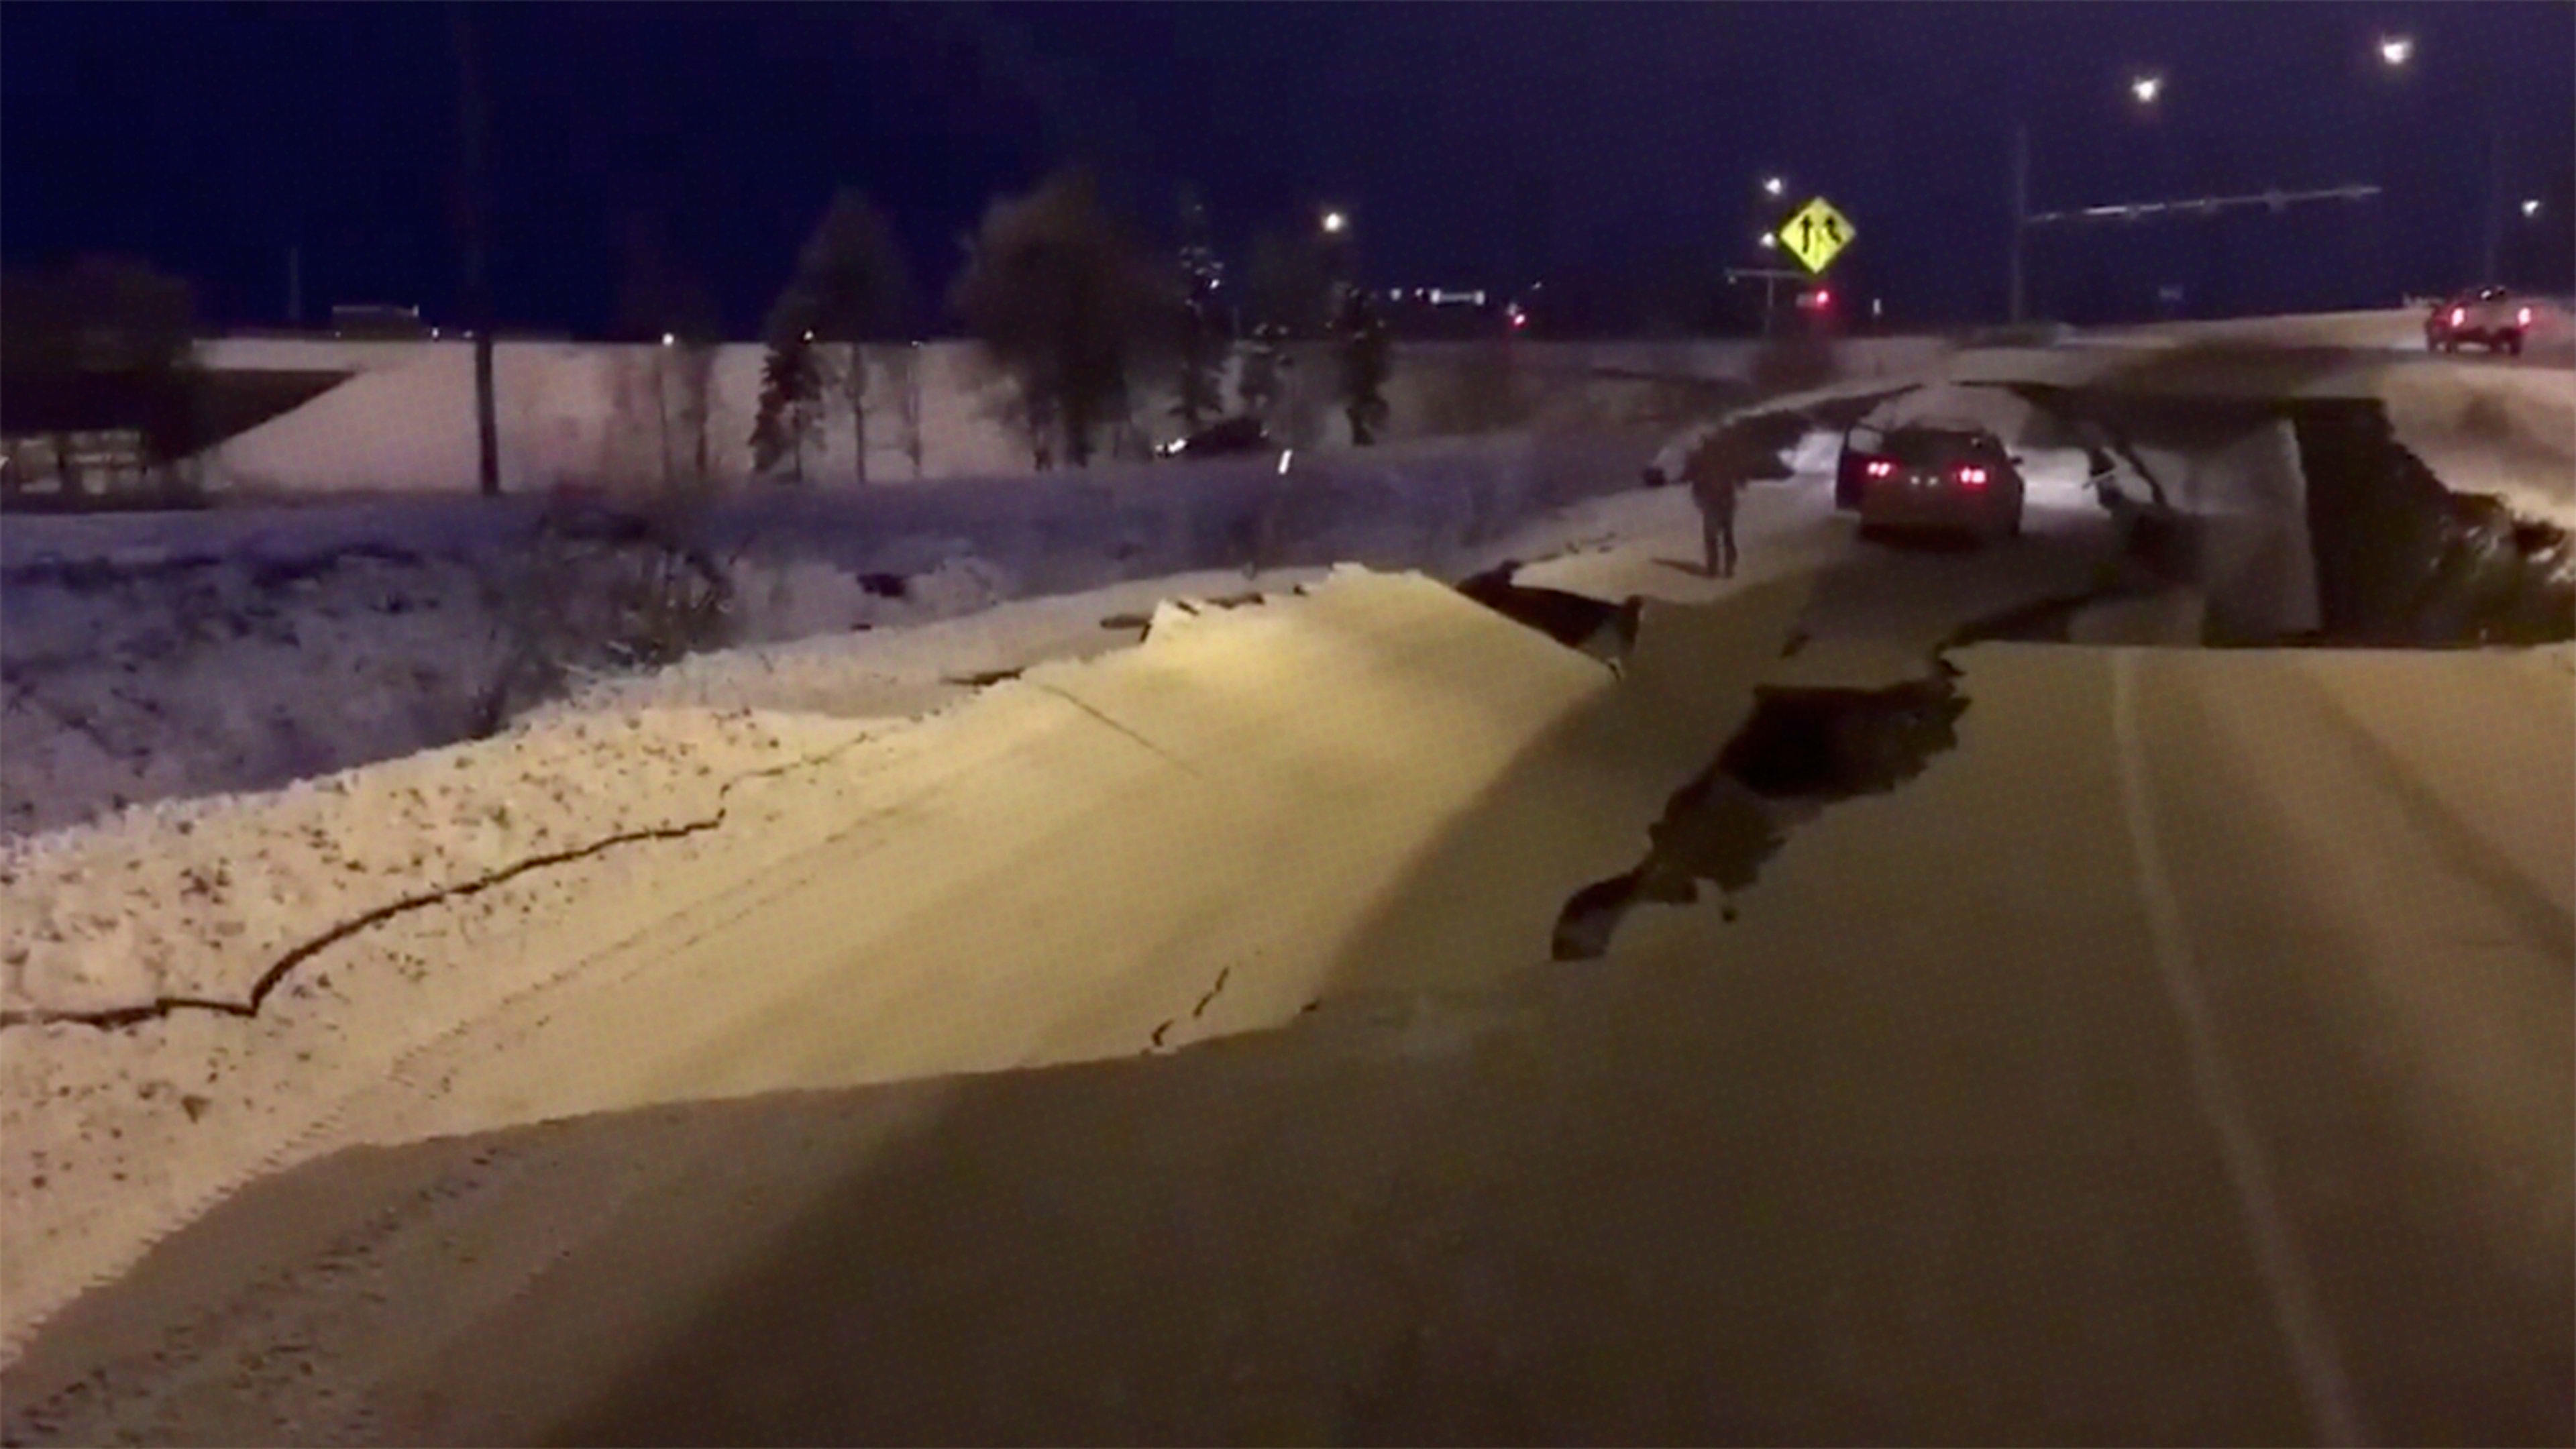 Anchorage earthquake: Photos and videos show street damage, trembling structures